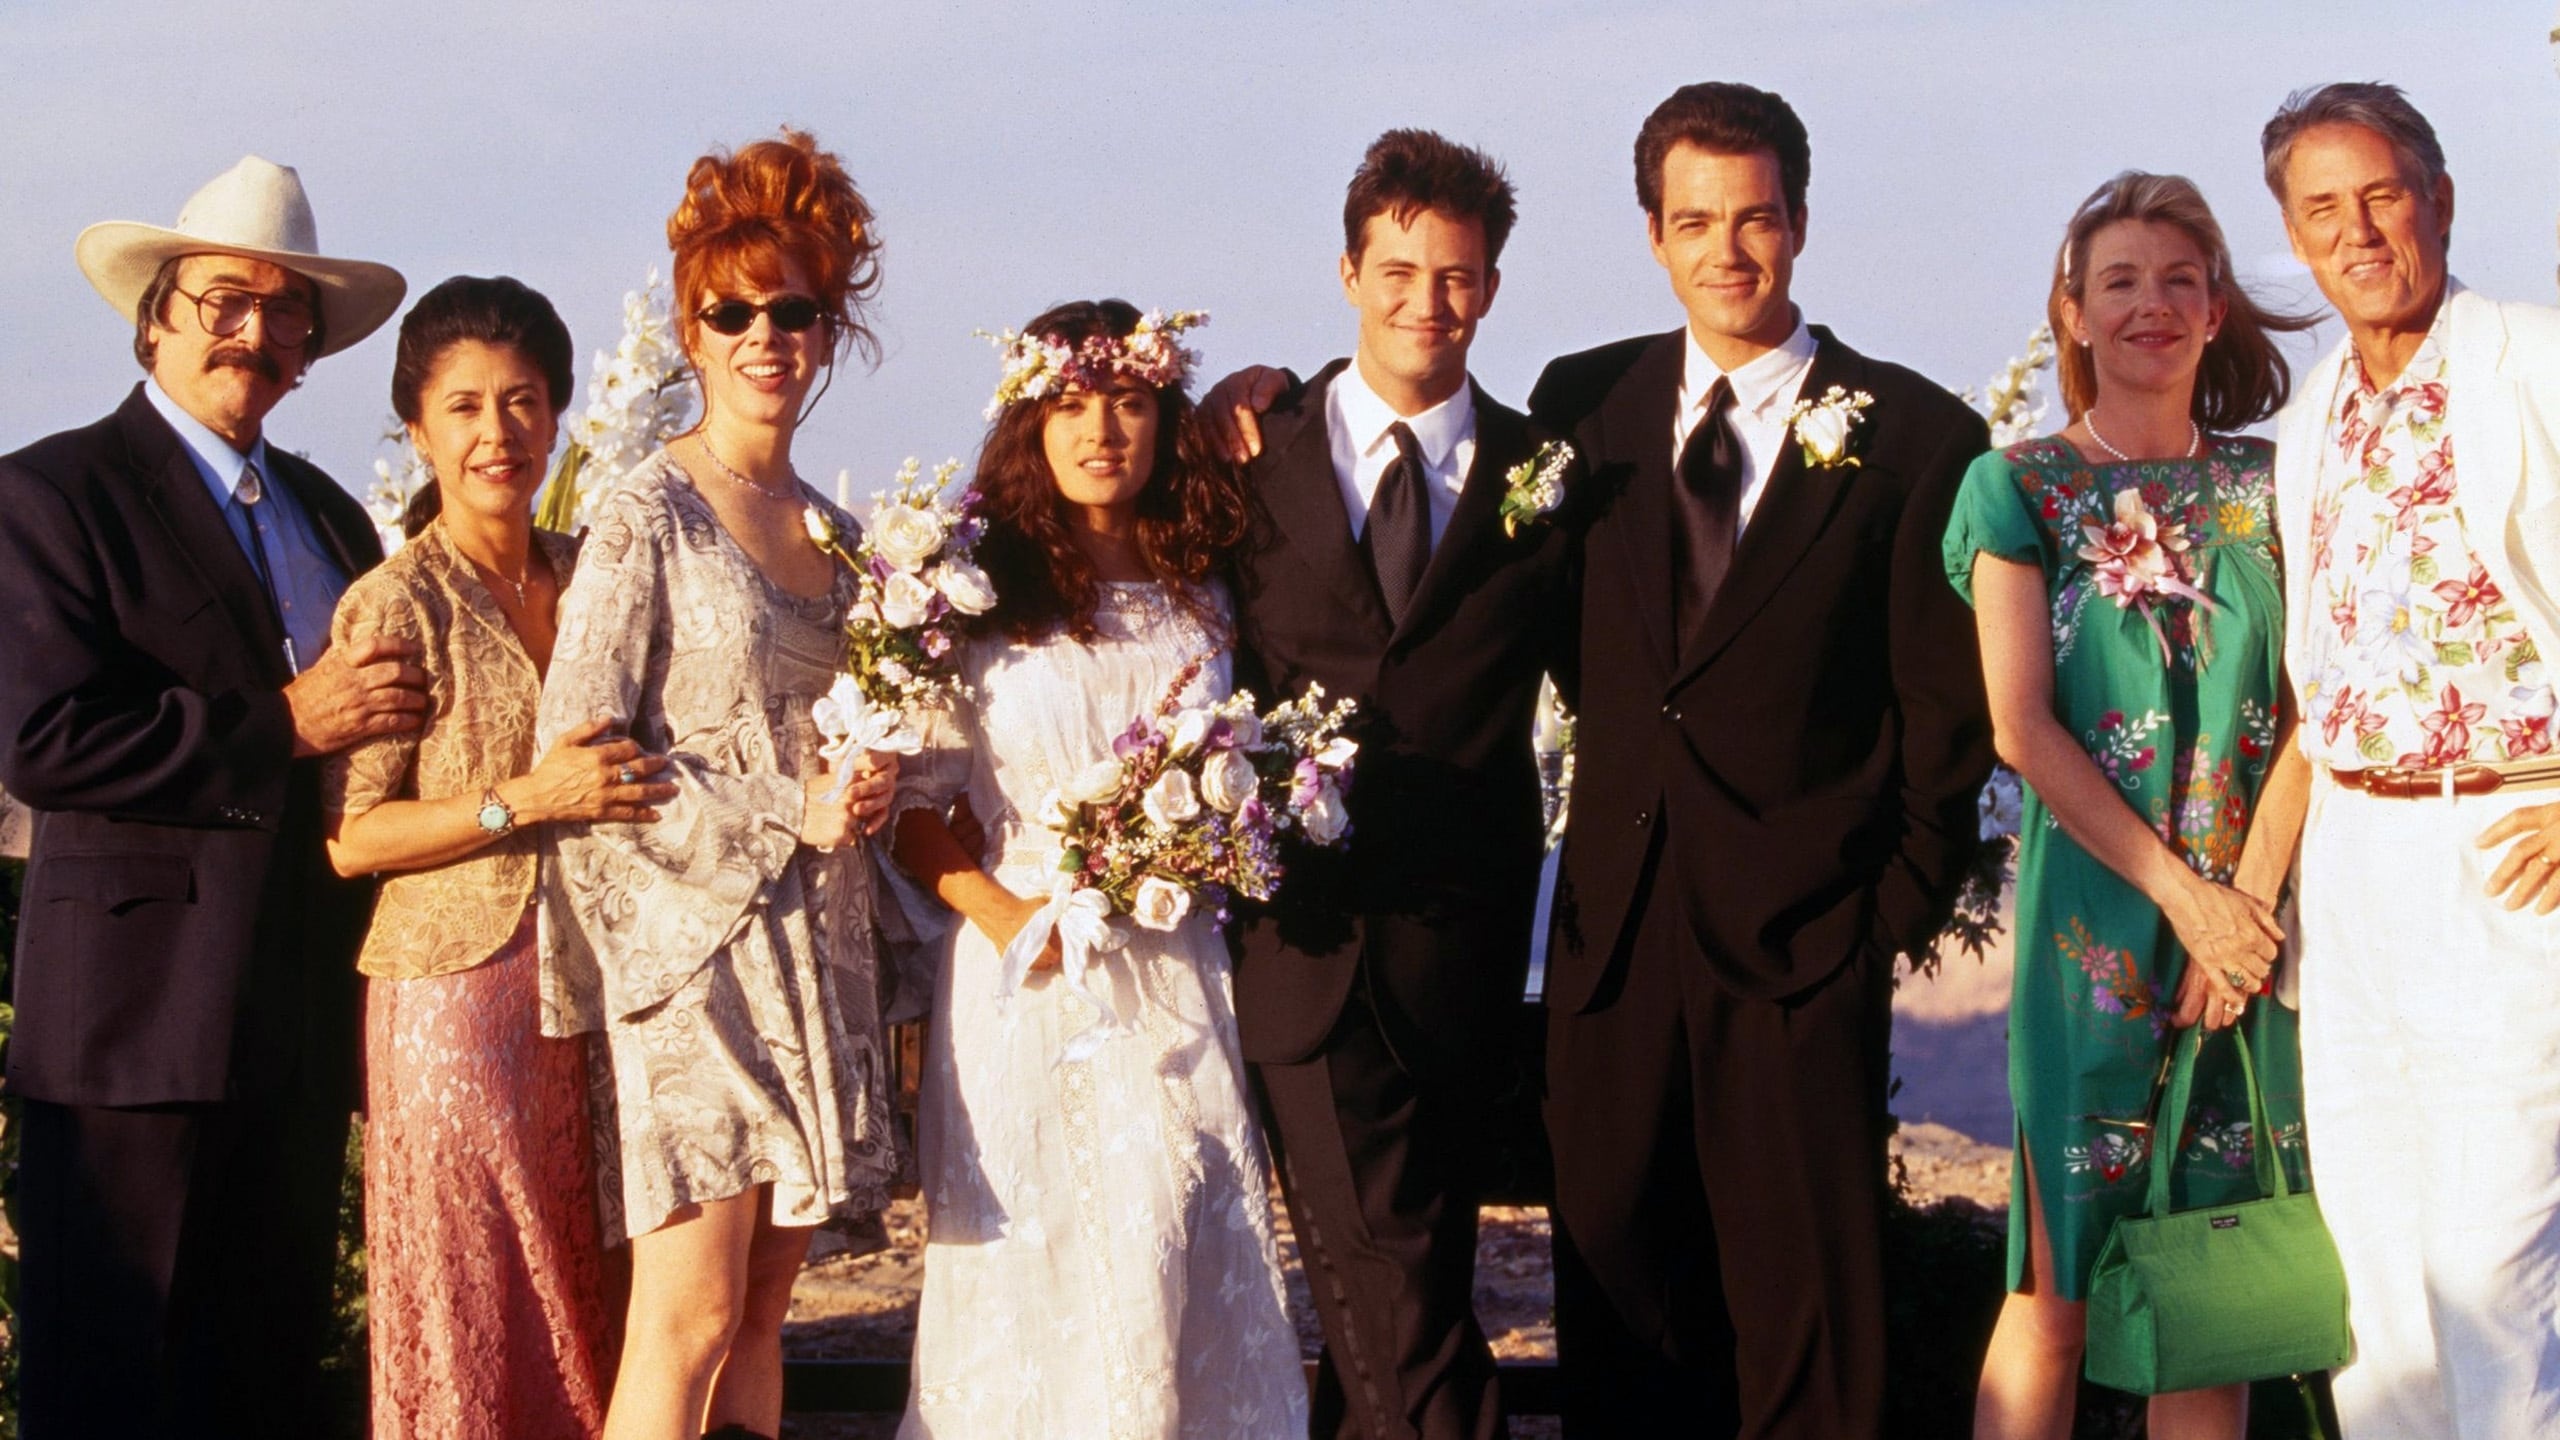 Fools Rush In (Movie): The wedding of Alex Whitman and Isabel Fuentes-Whitman. 2560x1440 HD Background.